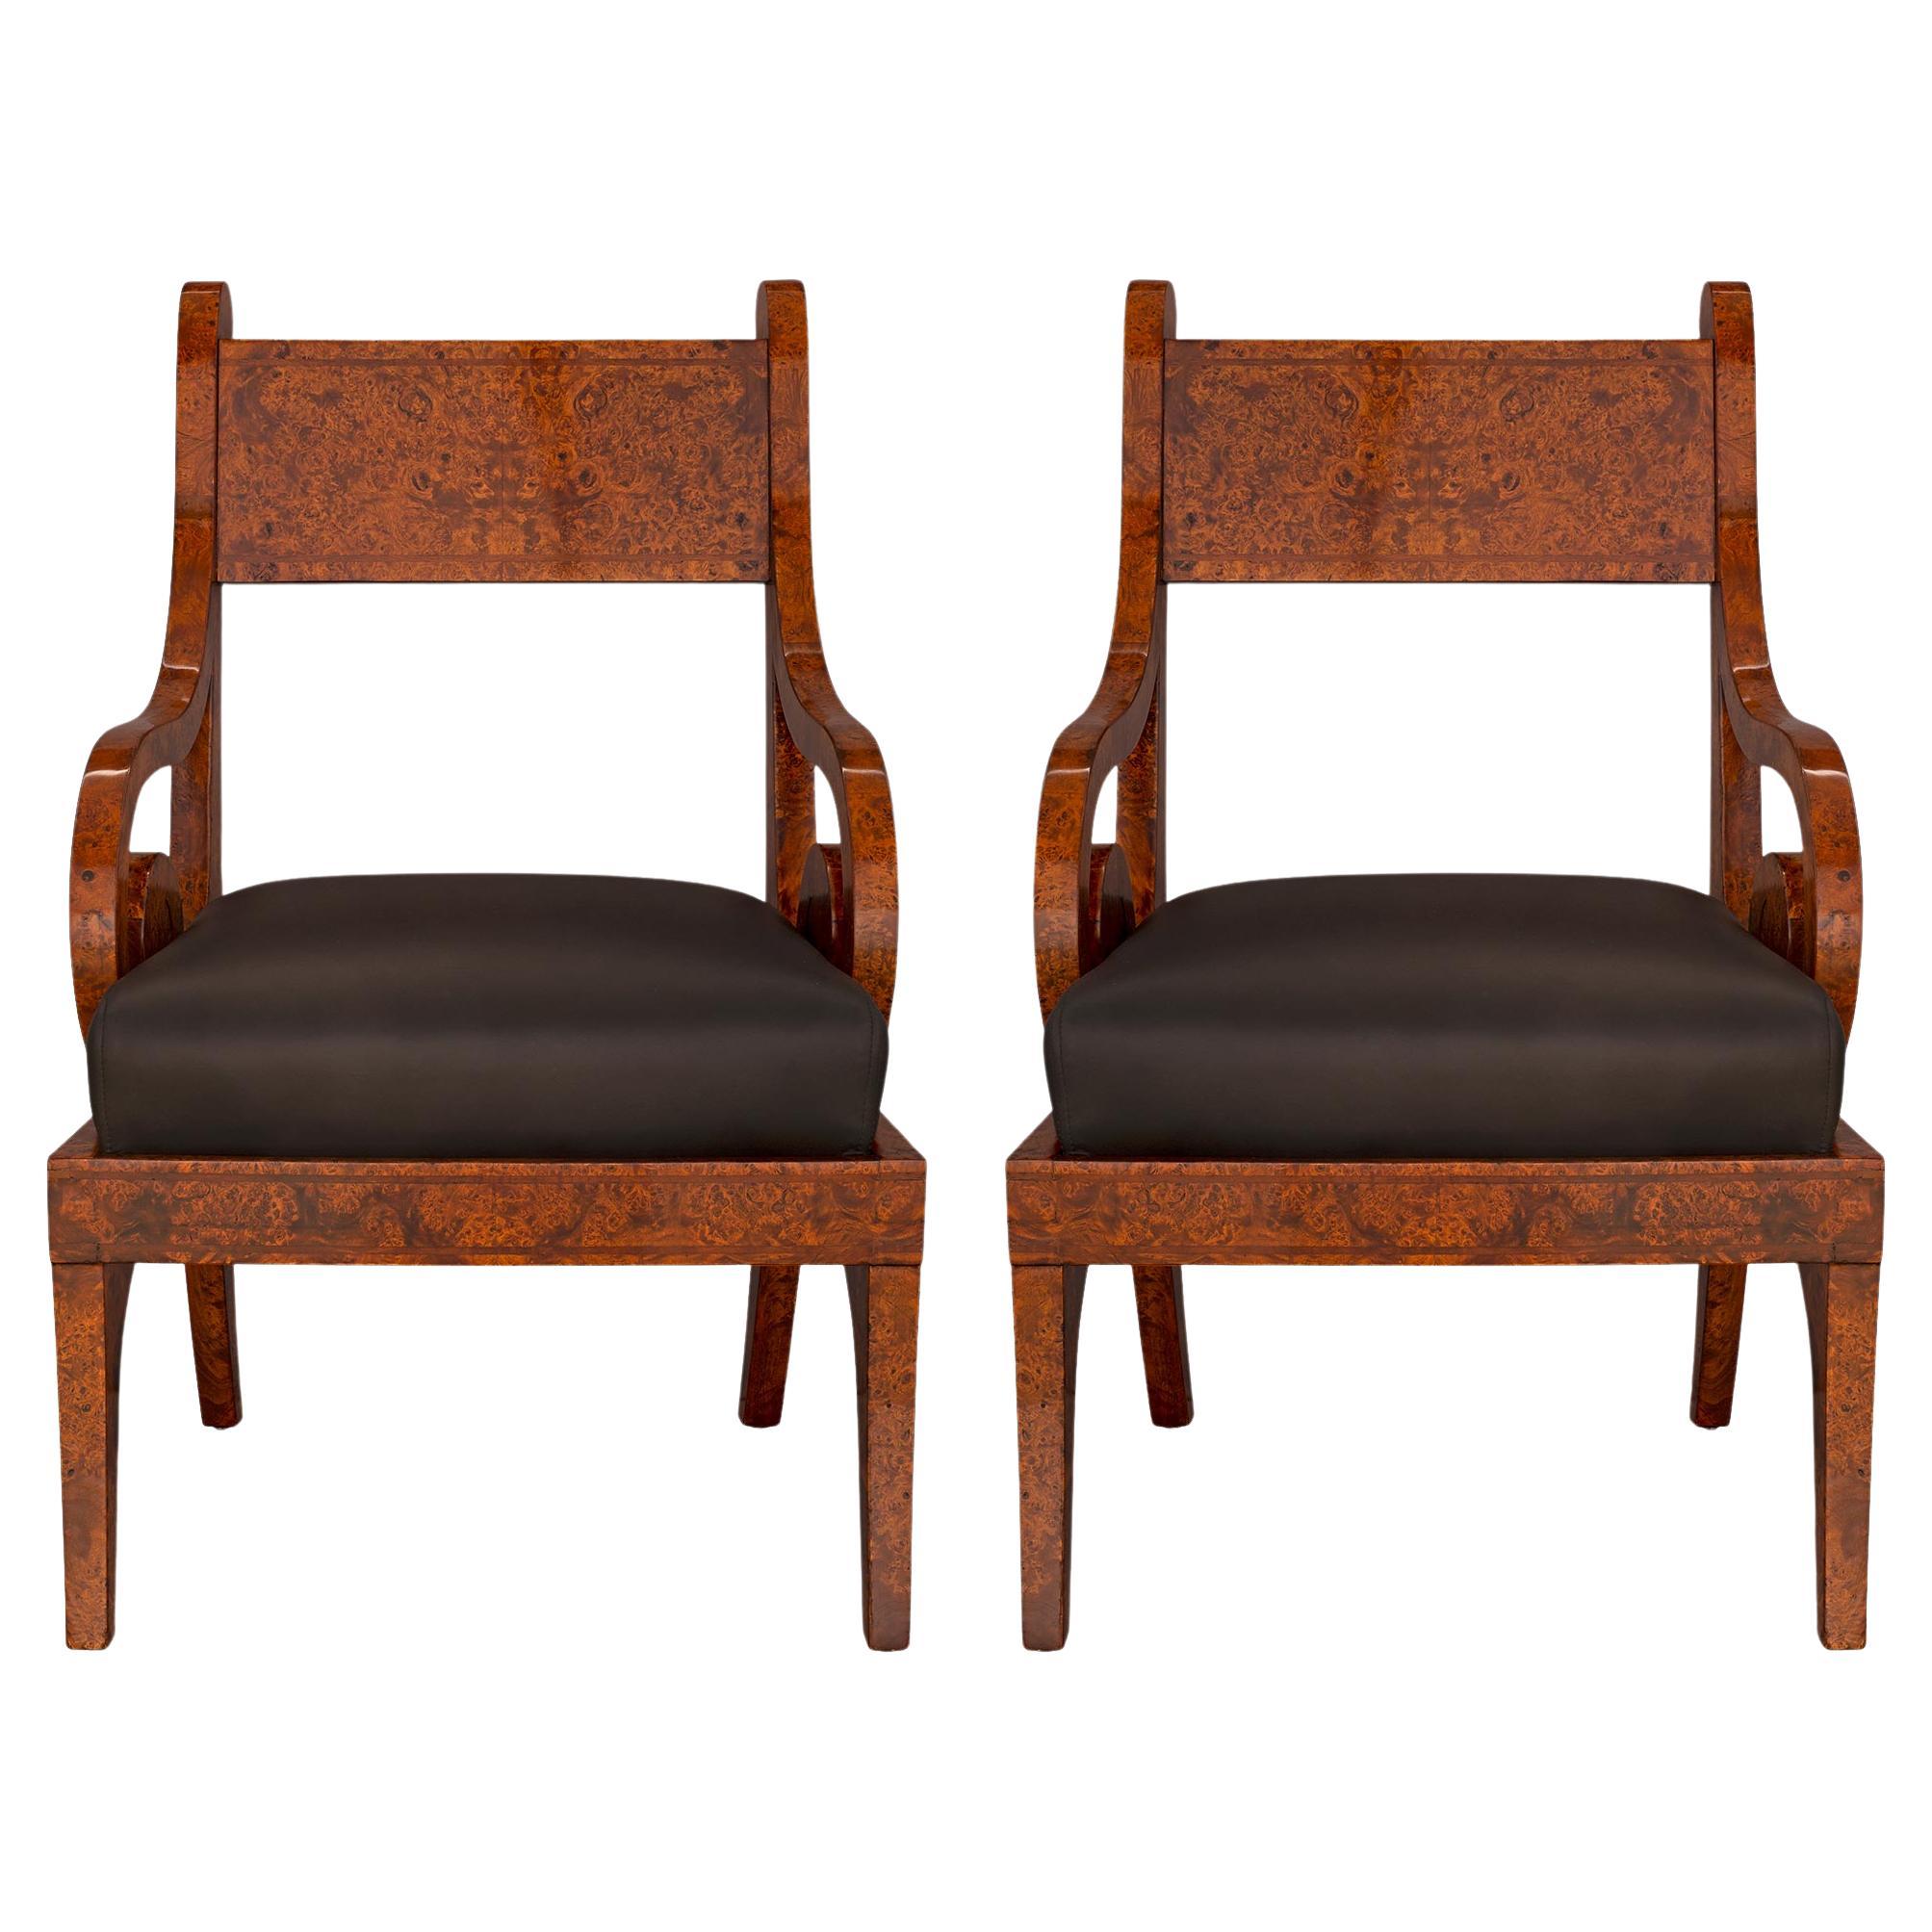 Pair of Continental Early 19th Century Neo-Classical St. Burl Elm Wood Armchairs For Sale